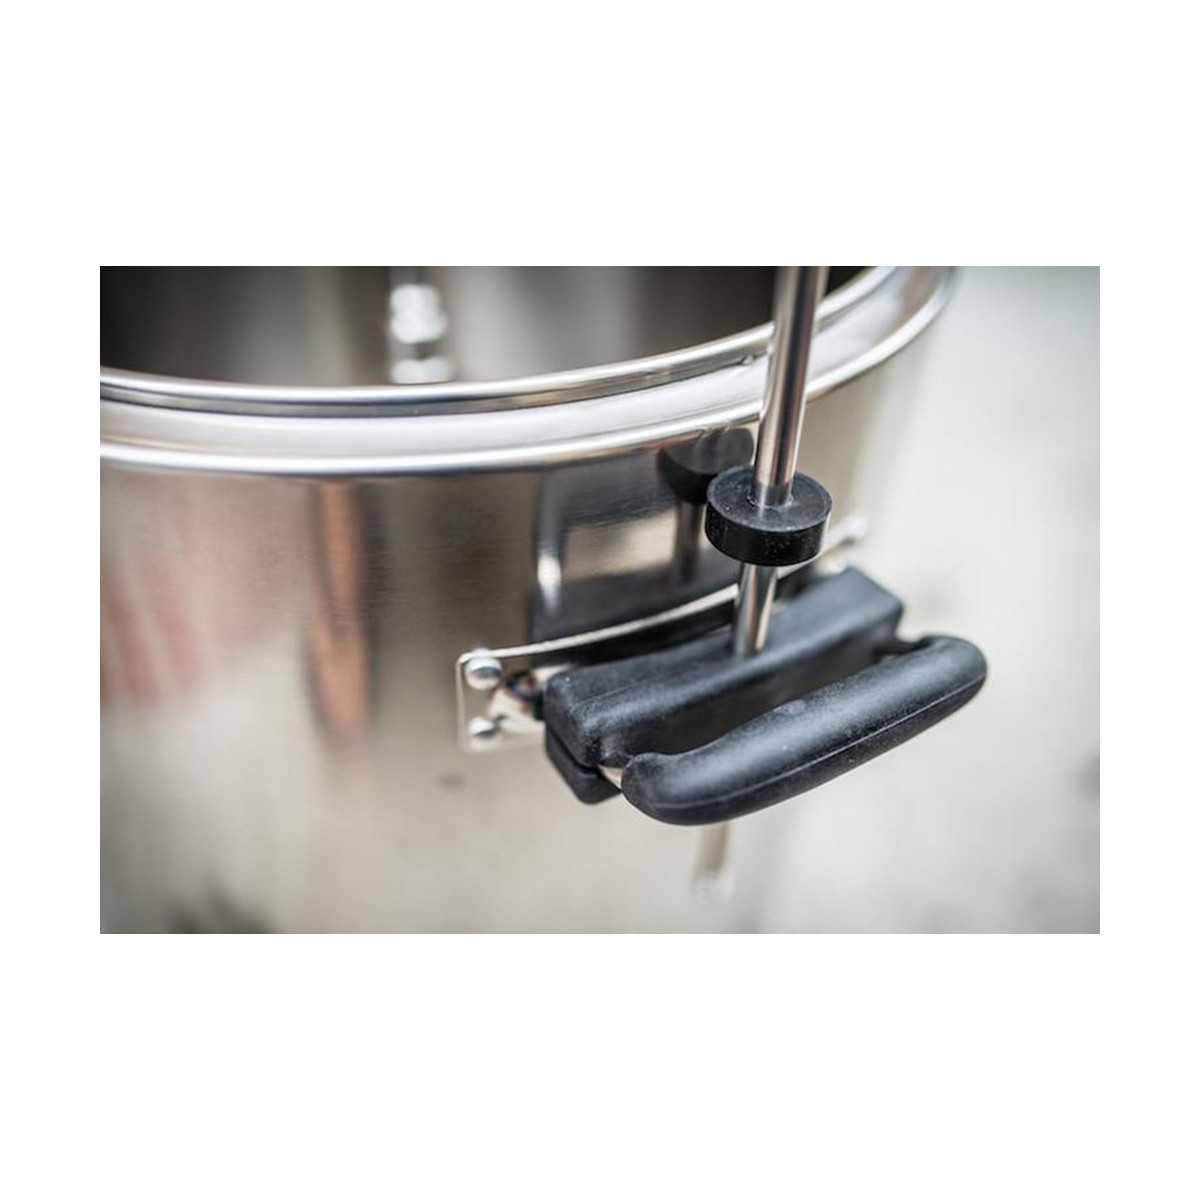 Ss Brewtech™ sparge arm kit for InfuSsion Mash Tun